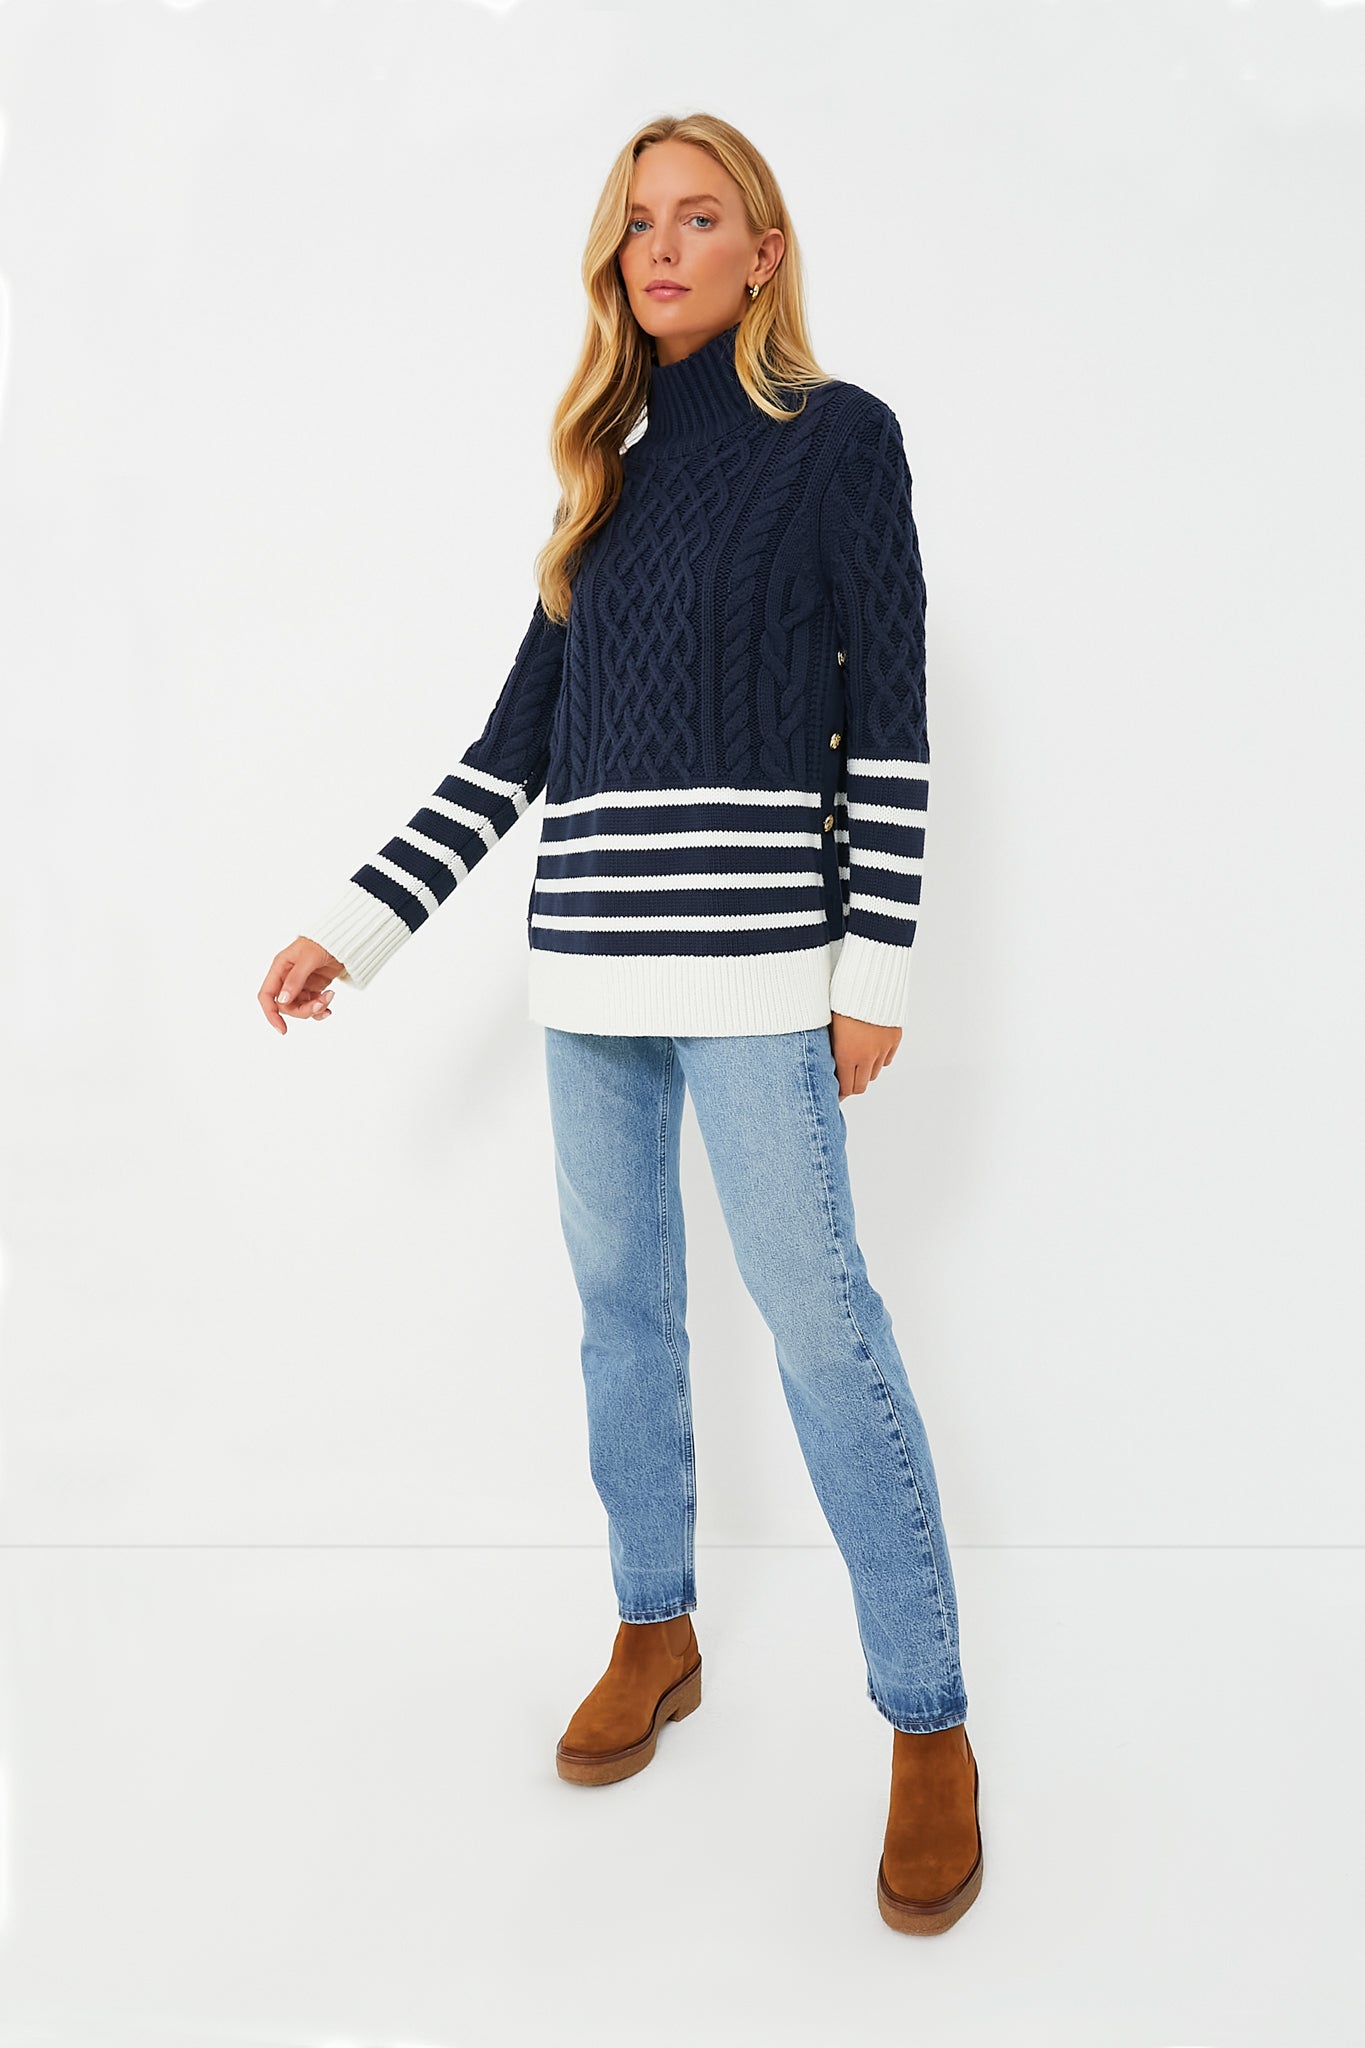 Hope & Henry Womens' Long Sleeve Pointelle Sweater With Bellow